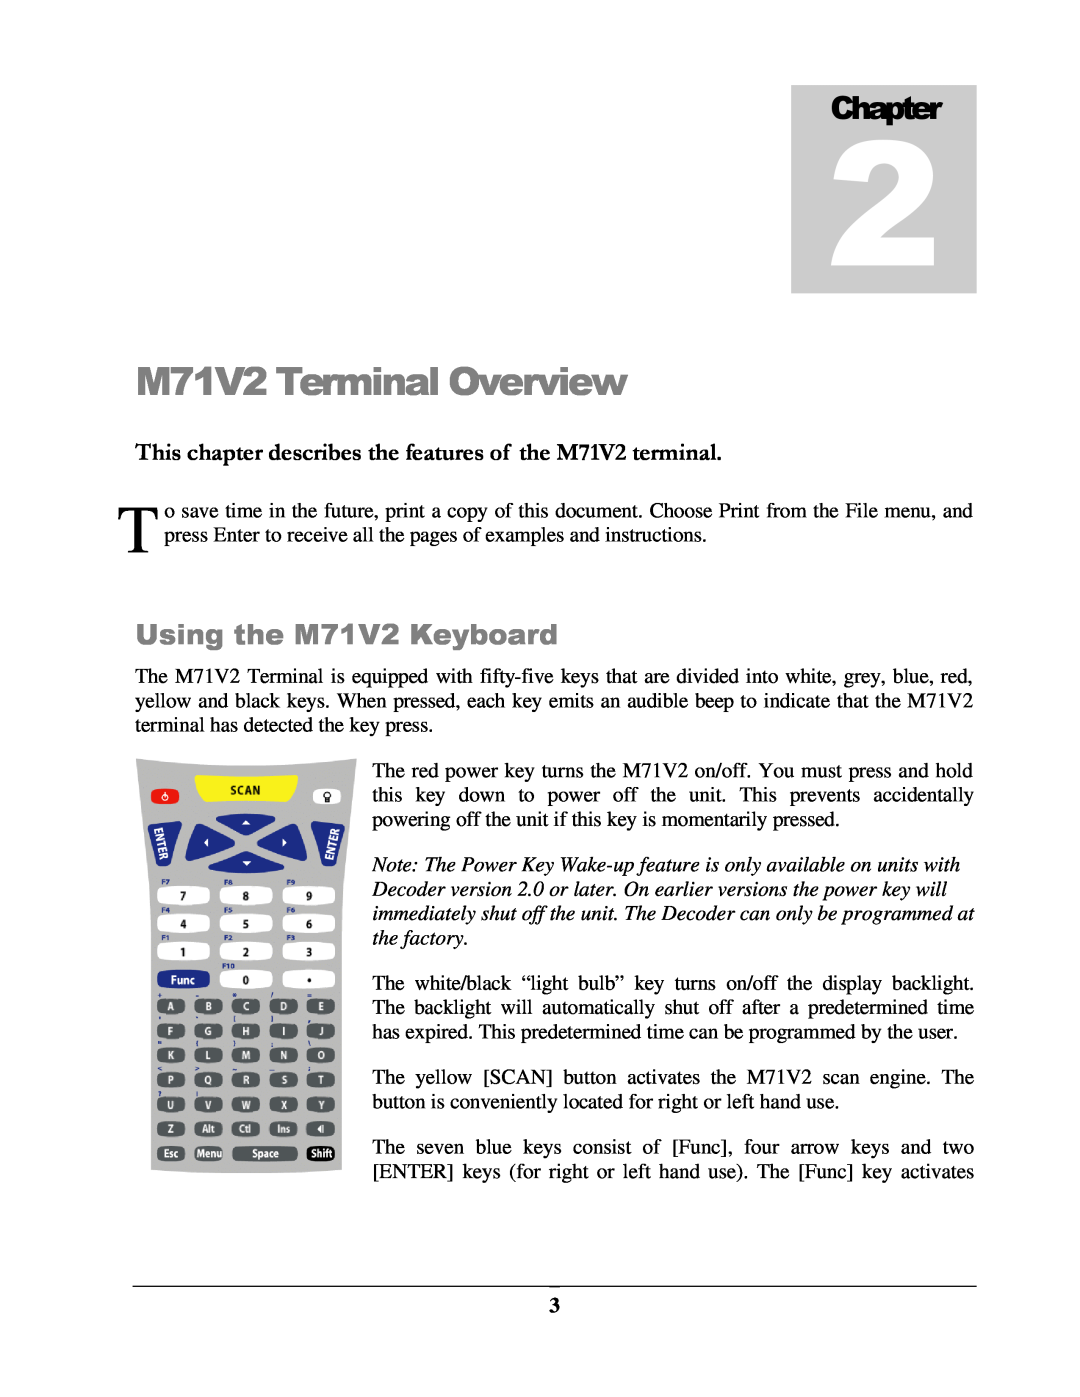 IBM manual M71V2 Terminal Overview, Using the M71V2 Keyboard, This chapter describes the features of the M71V2 terminal 